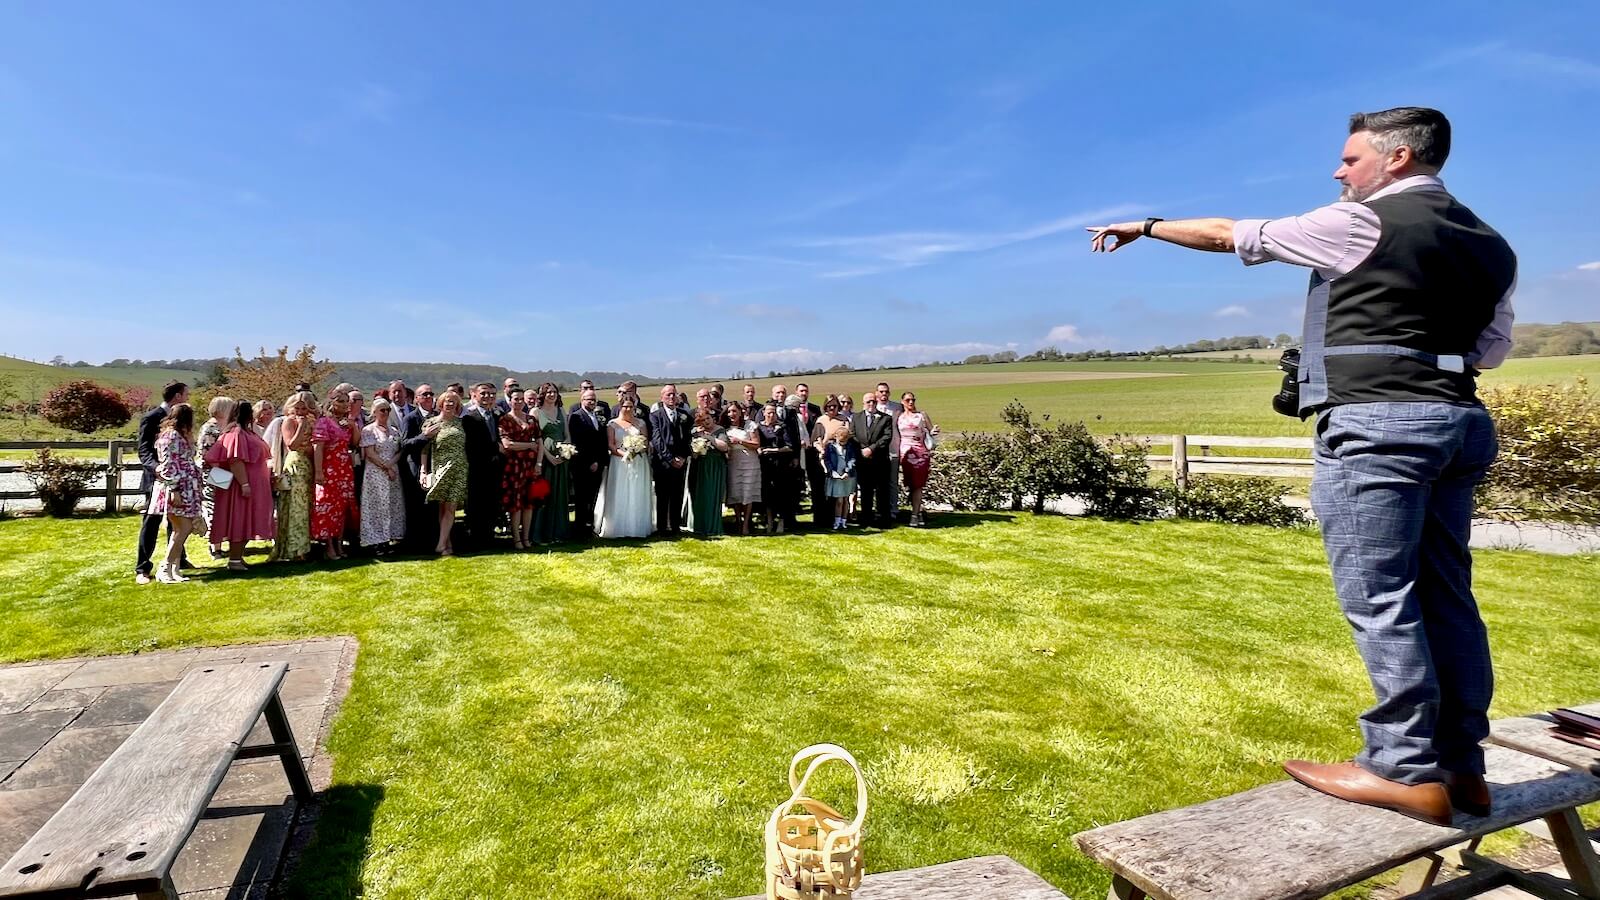 Wedding photographer Andy Hornby directing the wedding party for a perfect group photo at Long Furlong Barn